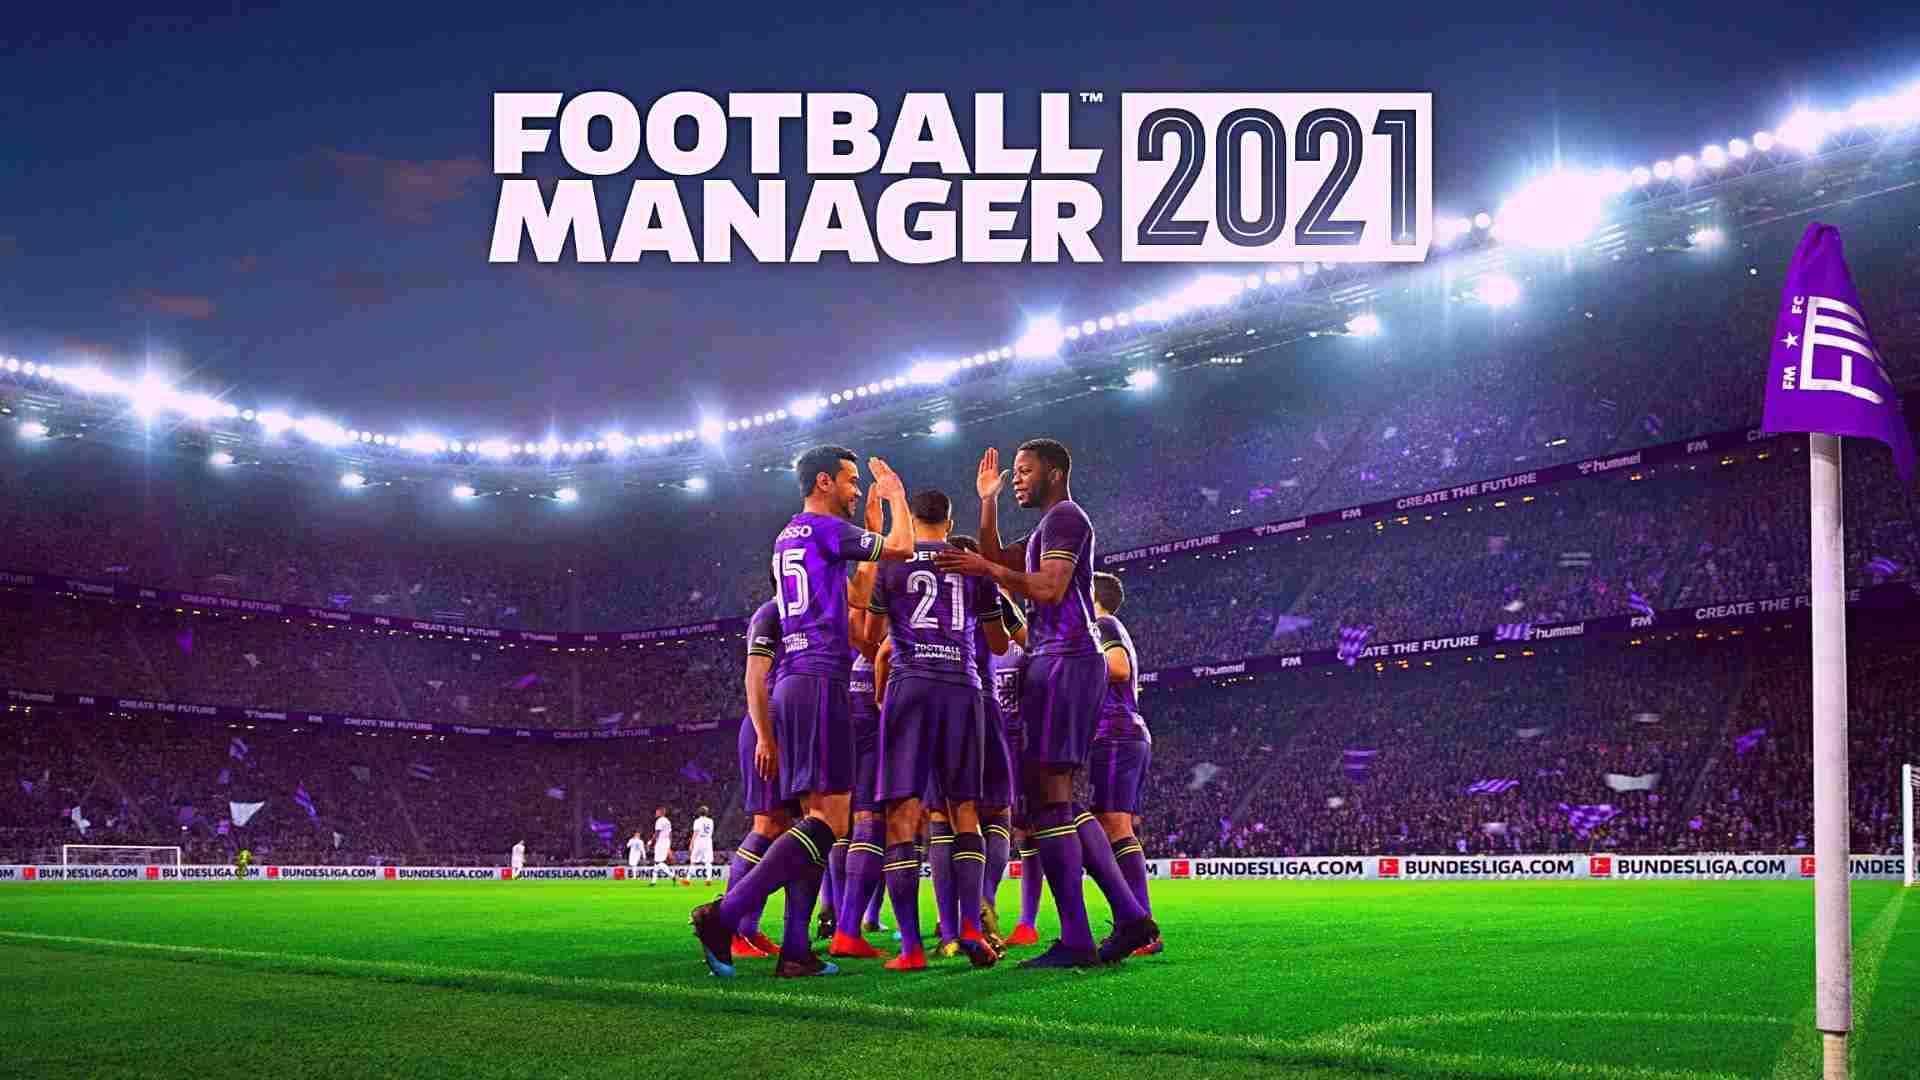 Football Manager 2021 Parents Guide and Age Rating | Video Game)